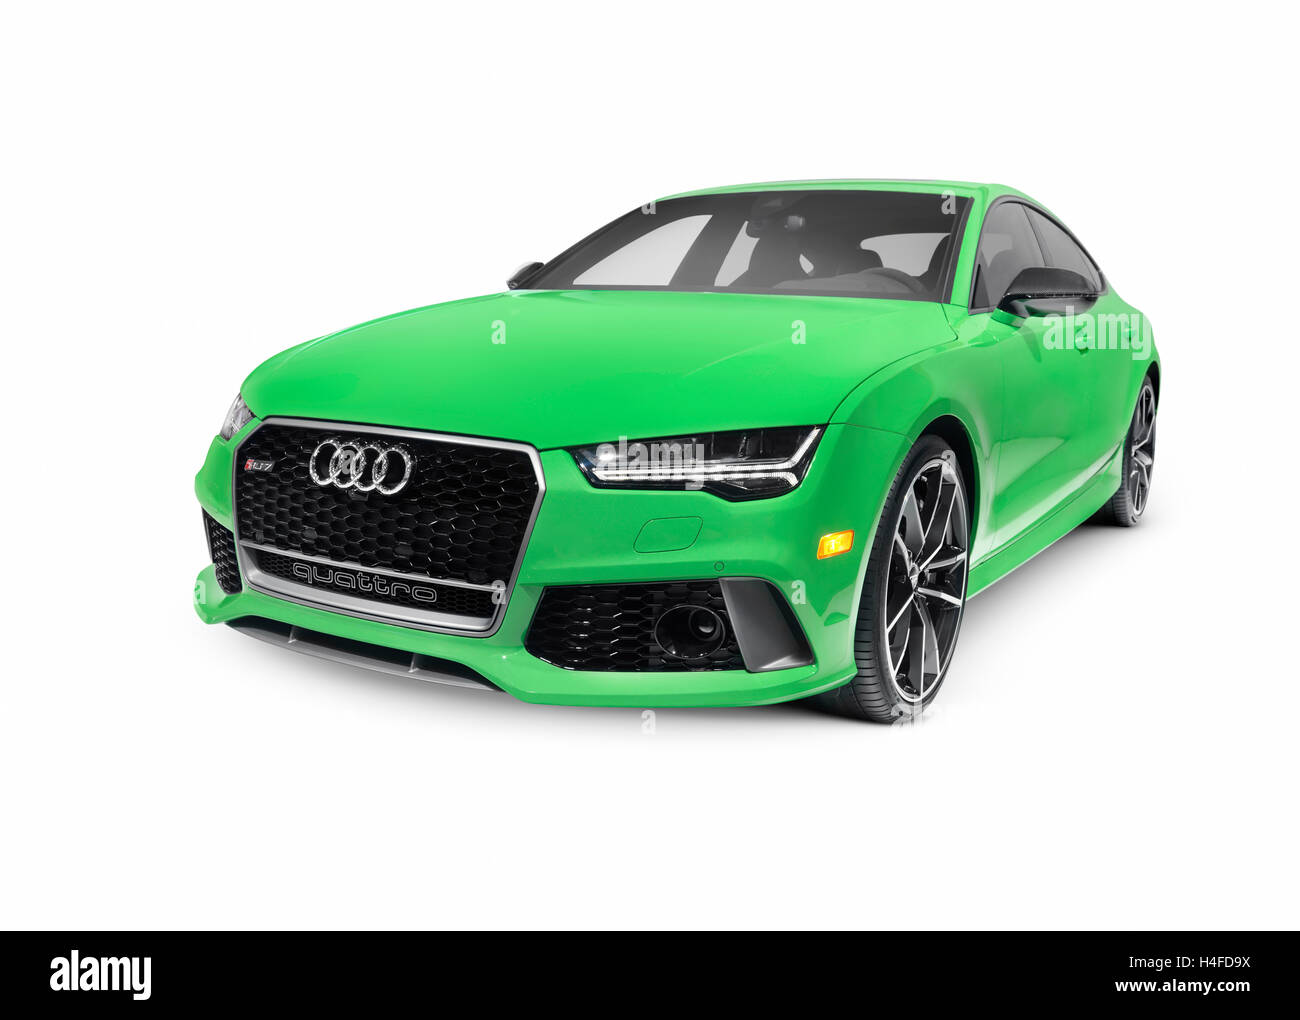 License and prints at MaximImages.com - Green 2016 Audi RS 7 Prestige Quattro Sedan luxury car isolated on white background with clipping path Stock Photo